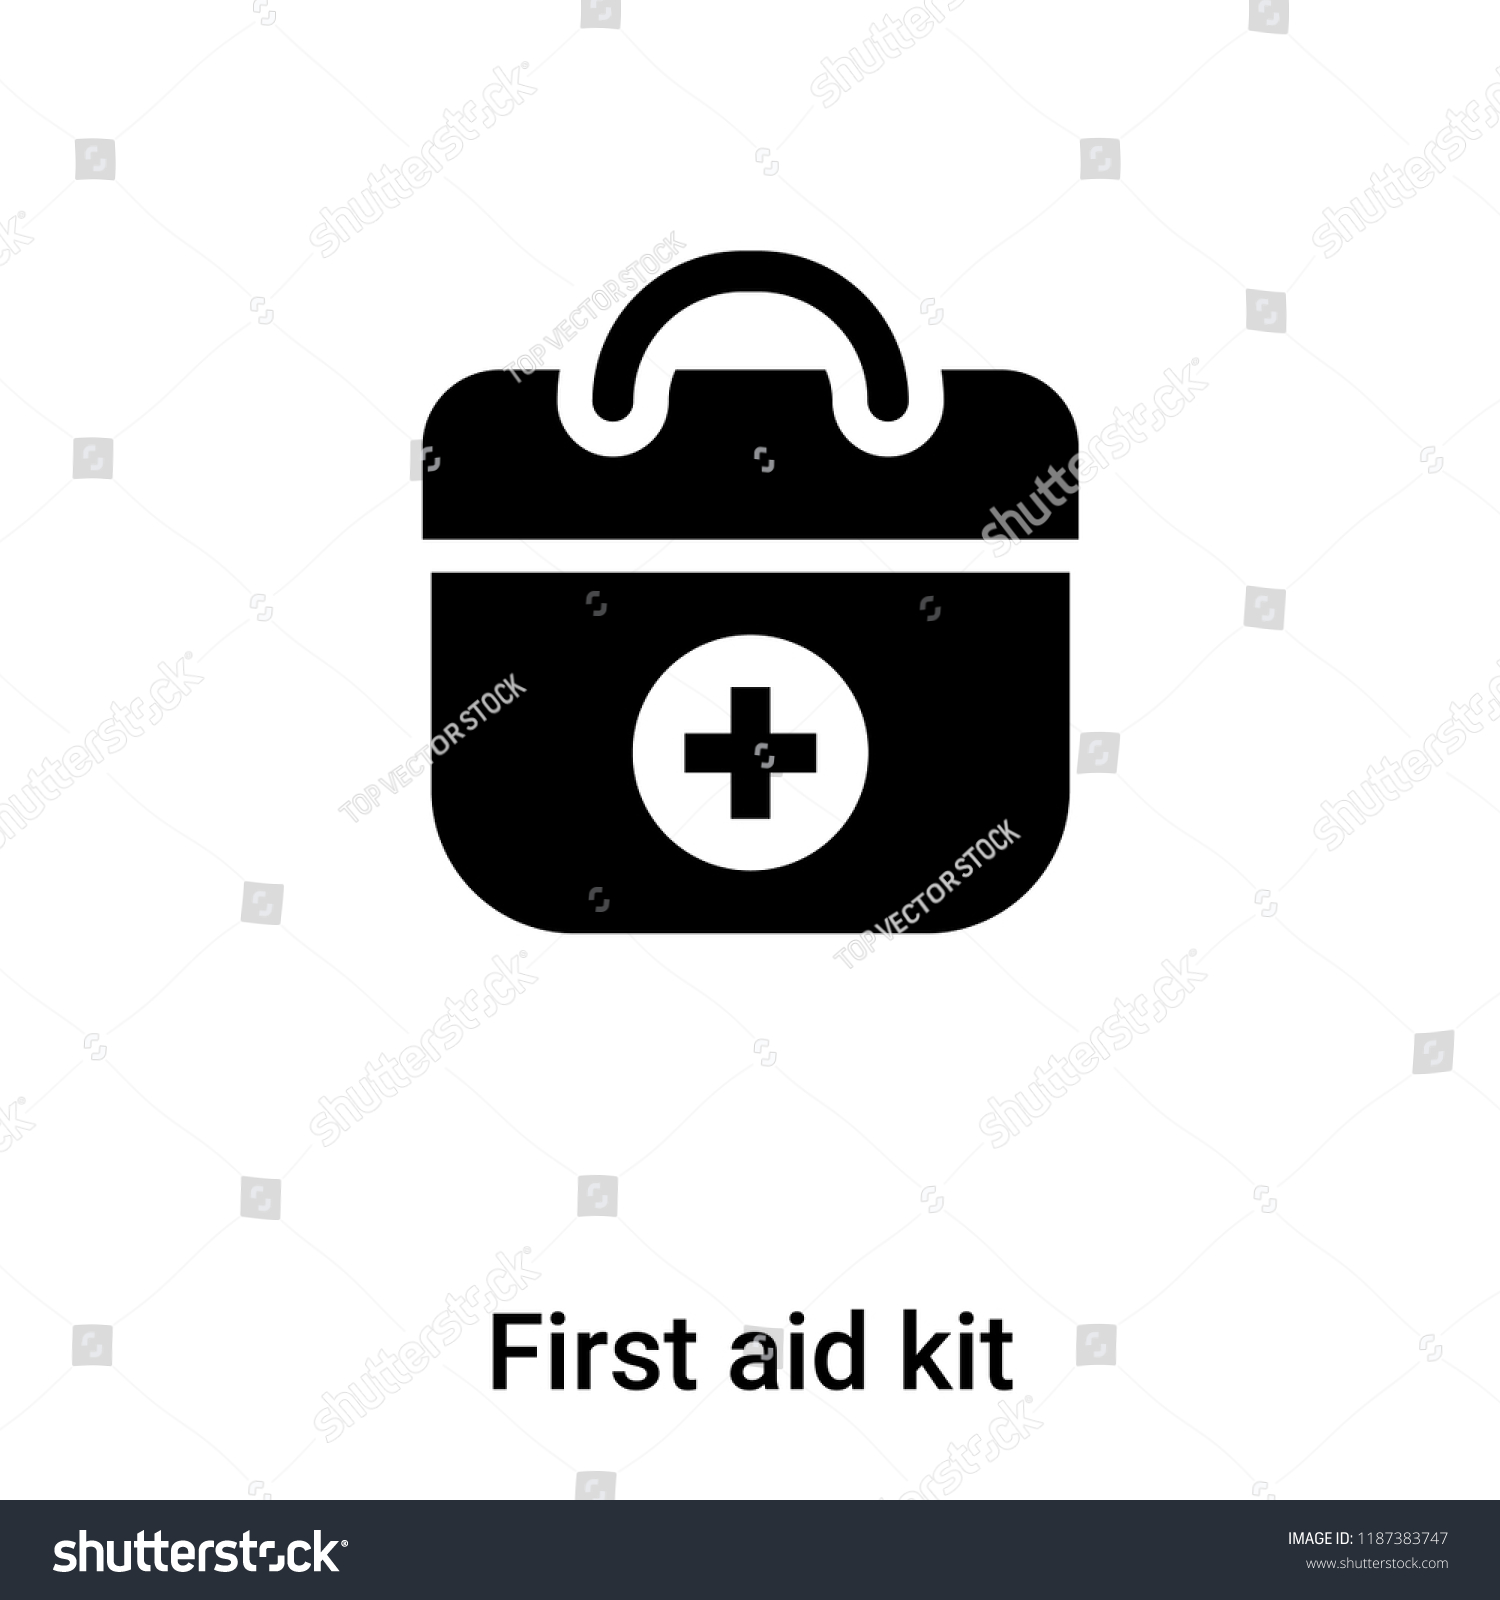 SVG of First aid kit icon vector isolated on white background, logo concept of First aid kit sign on transparent background, filled black symbol svg